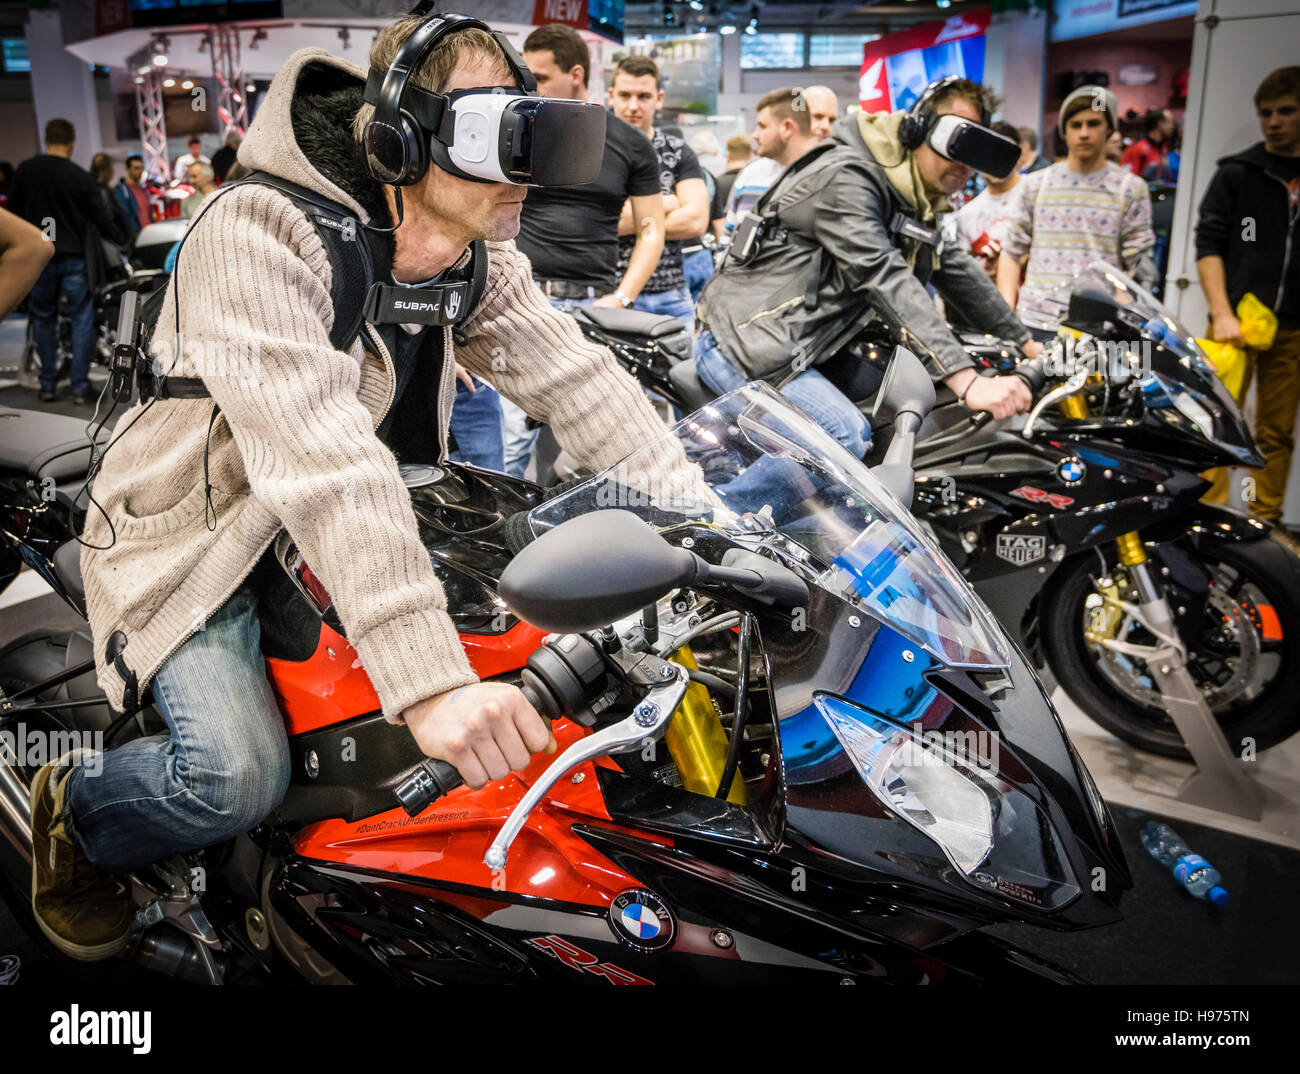 Zurich, Switzerland - 21 Feb 2016: Surrounded by other fairgoers, two men  wearing VR headsets are virtually riding motorbikes at the BMW stand of  Swiss Moto Zurich, Switzerland's largest motorcycle fair Stock Photo - Alamy